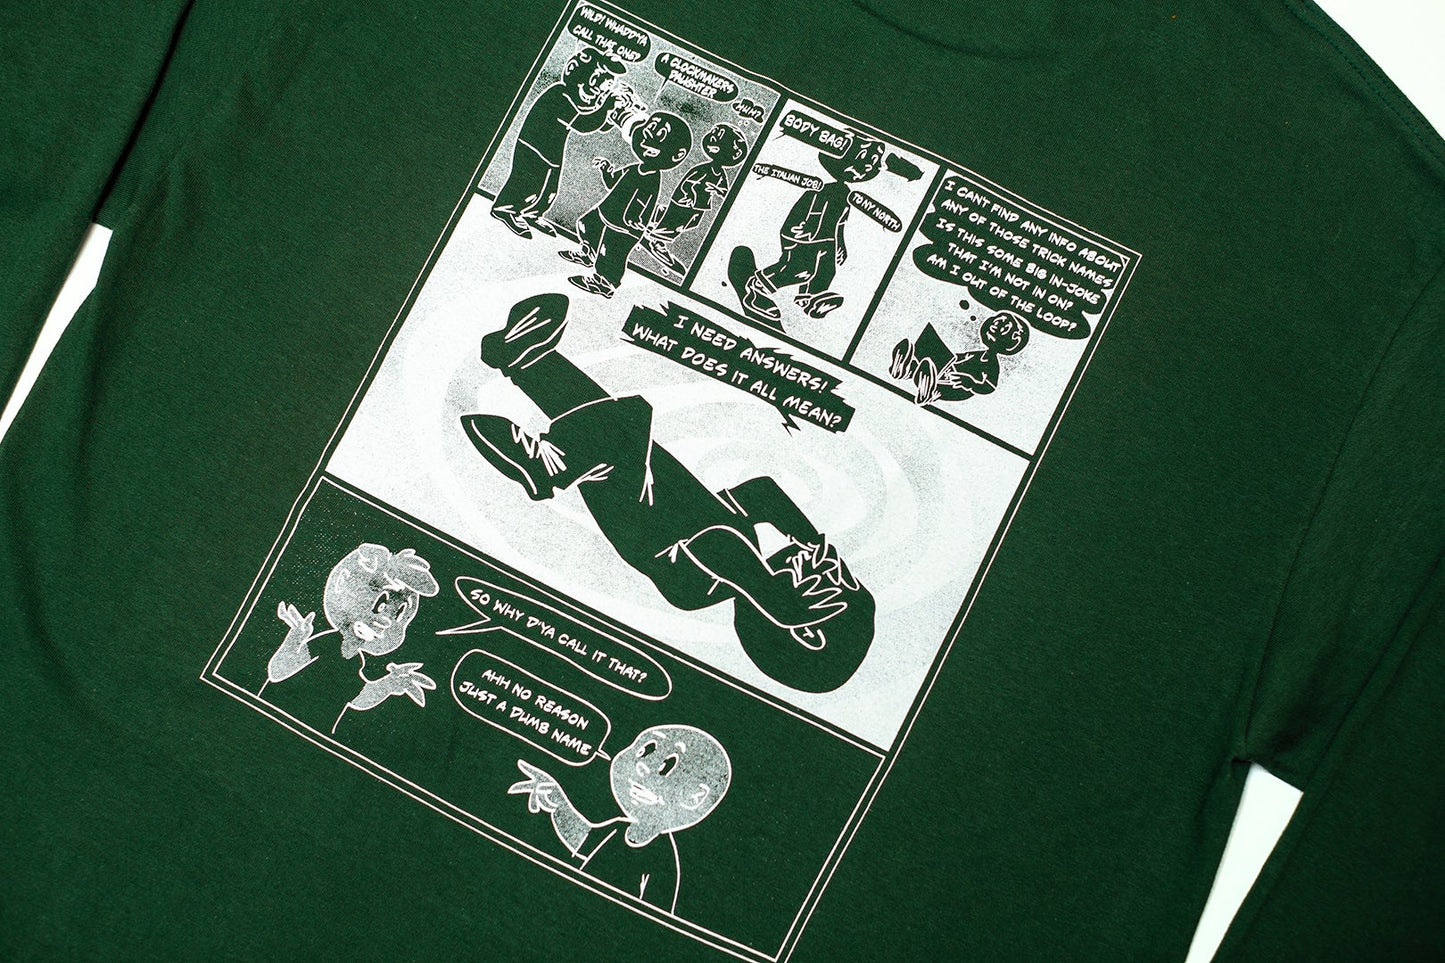 Vague x Serious Adult - Skate Phrases Longsleeve T-shirt - Forest Green.